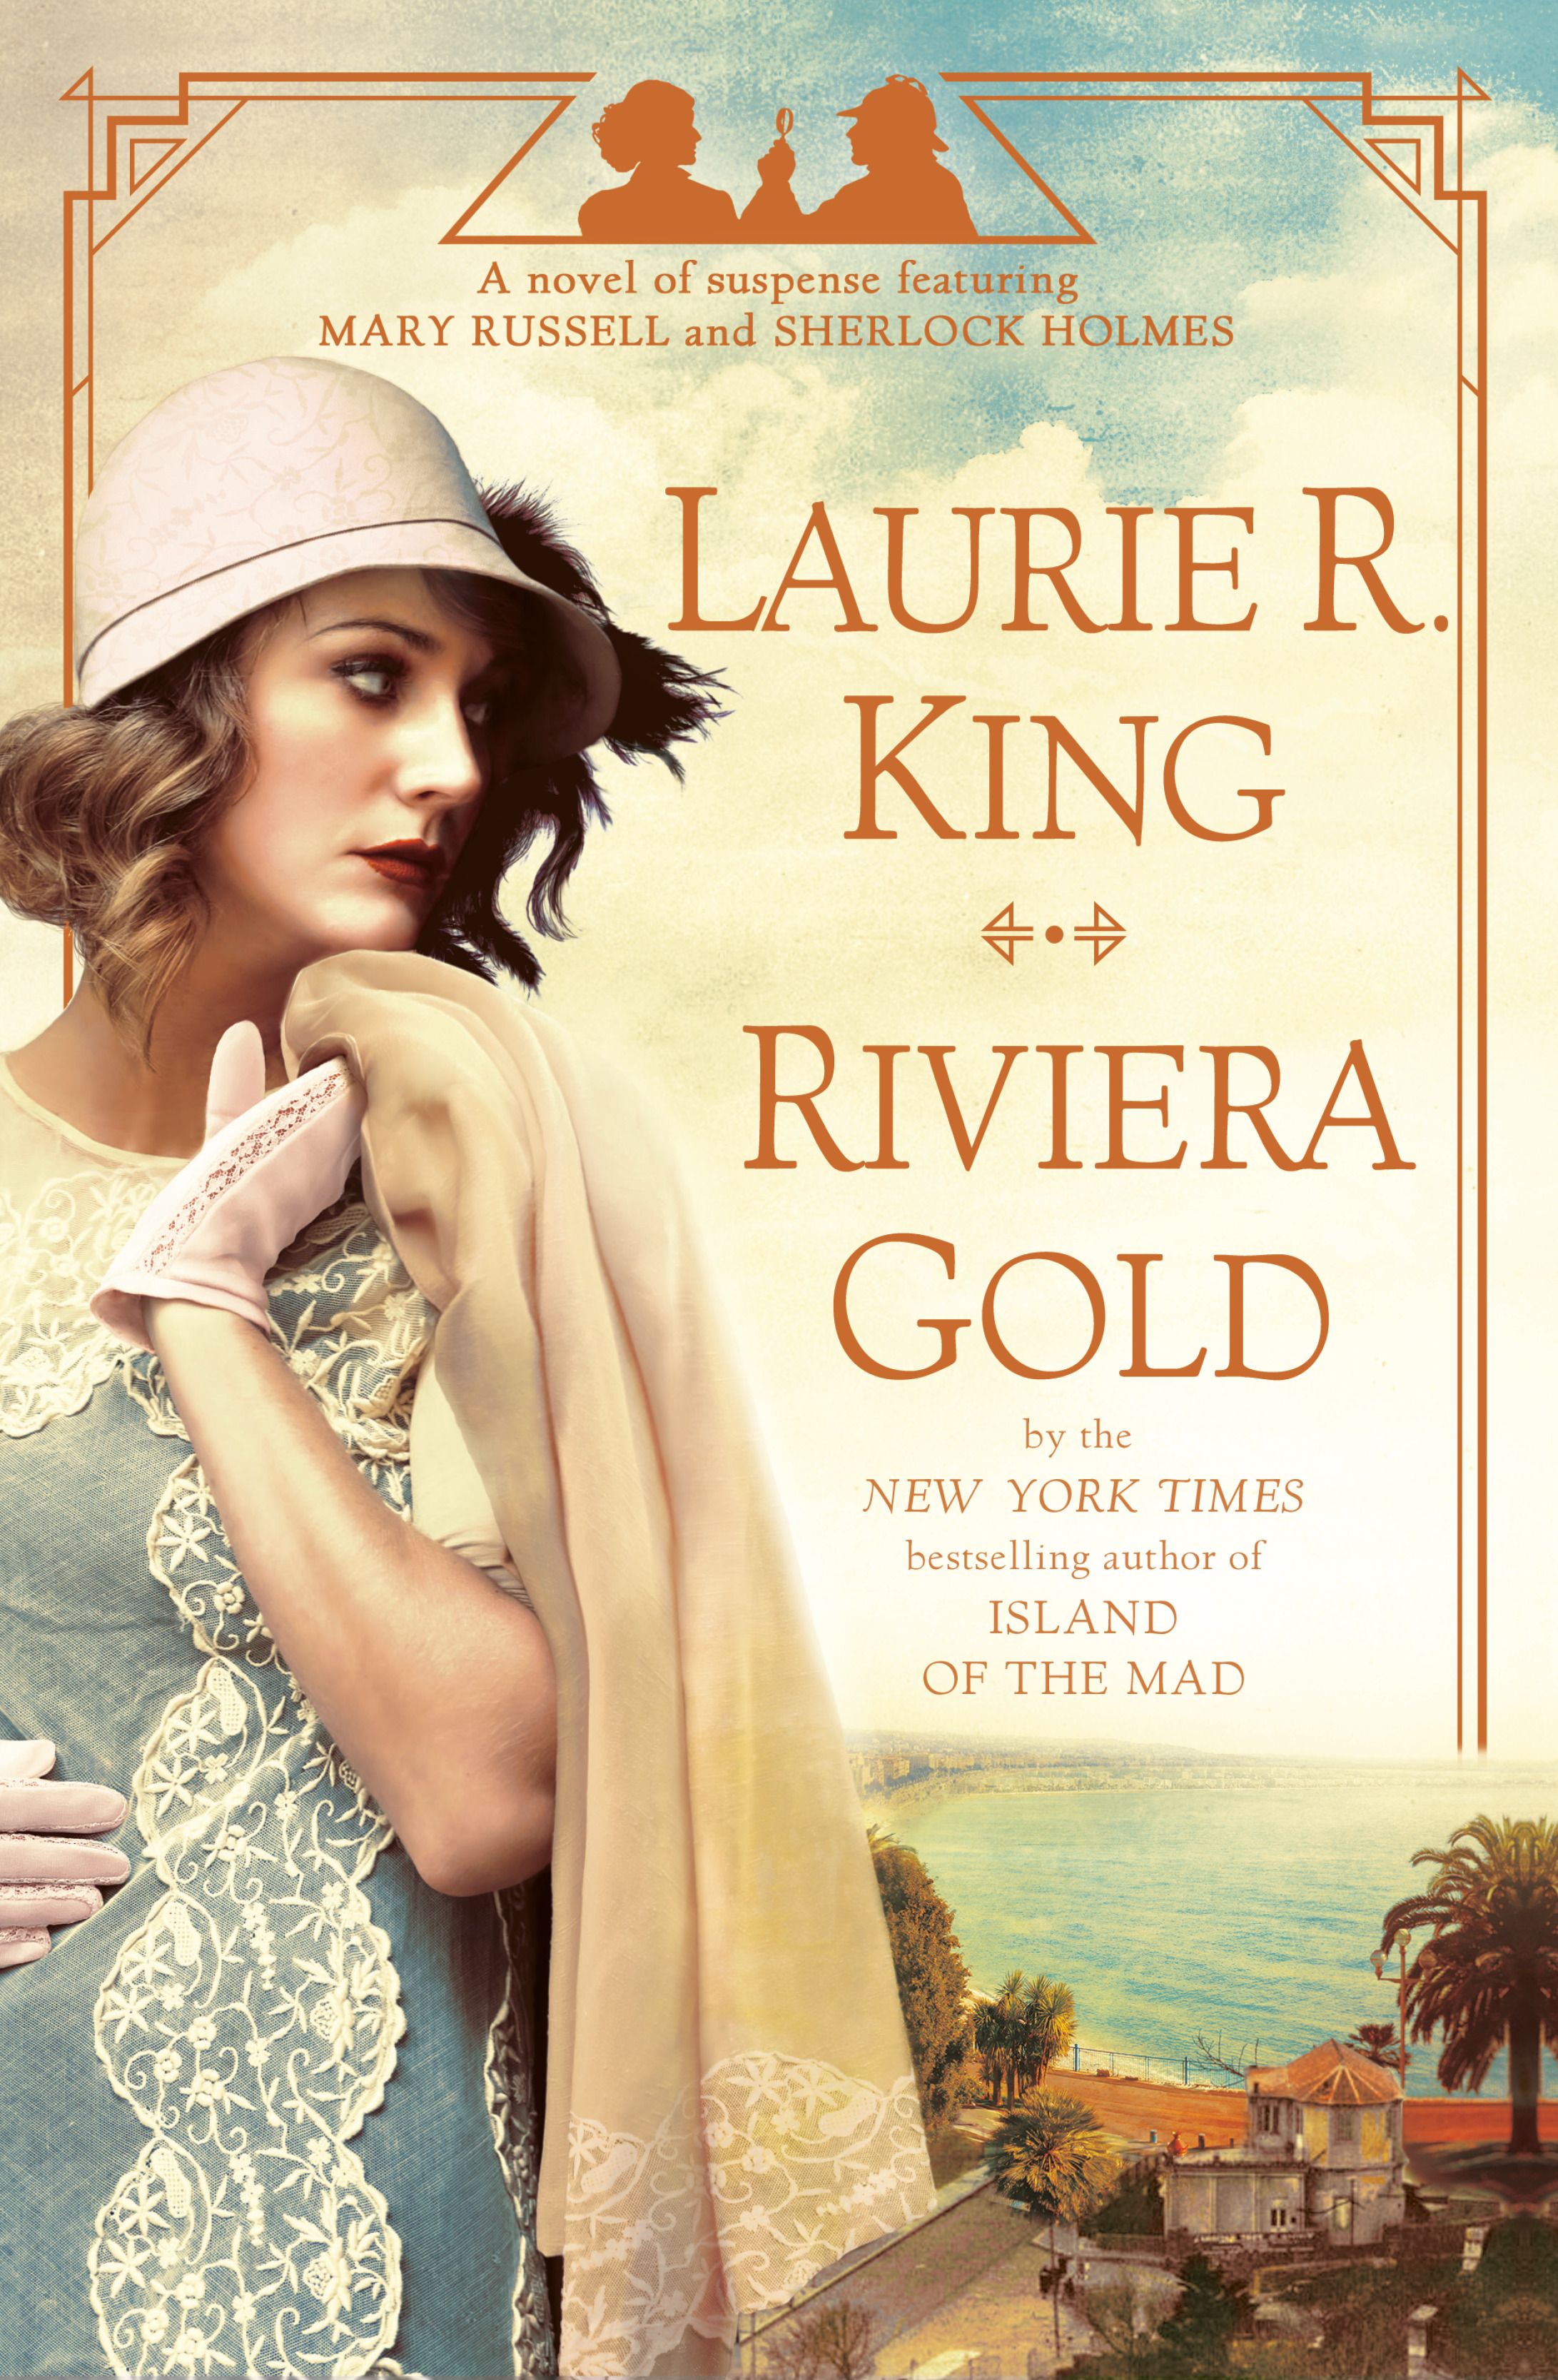 Riviera Gold : A novel of suspense featuring Mary Russell and Sherlock Holmes | King, Laurie R.